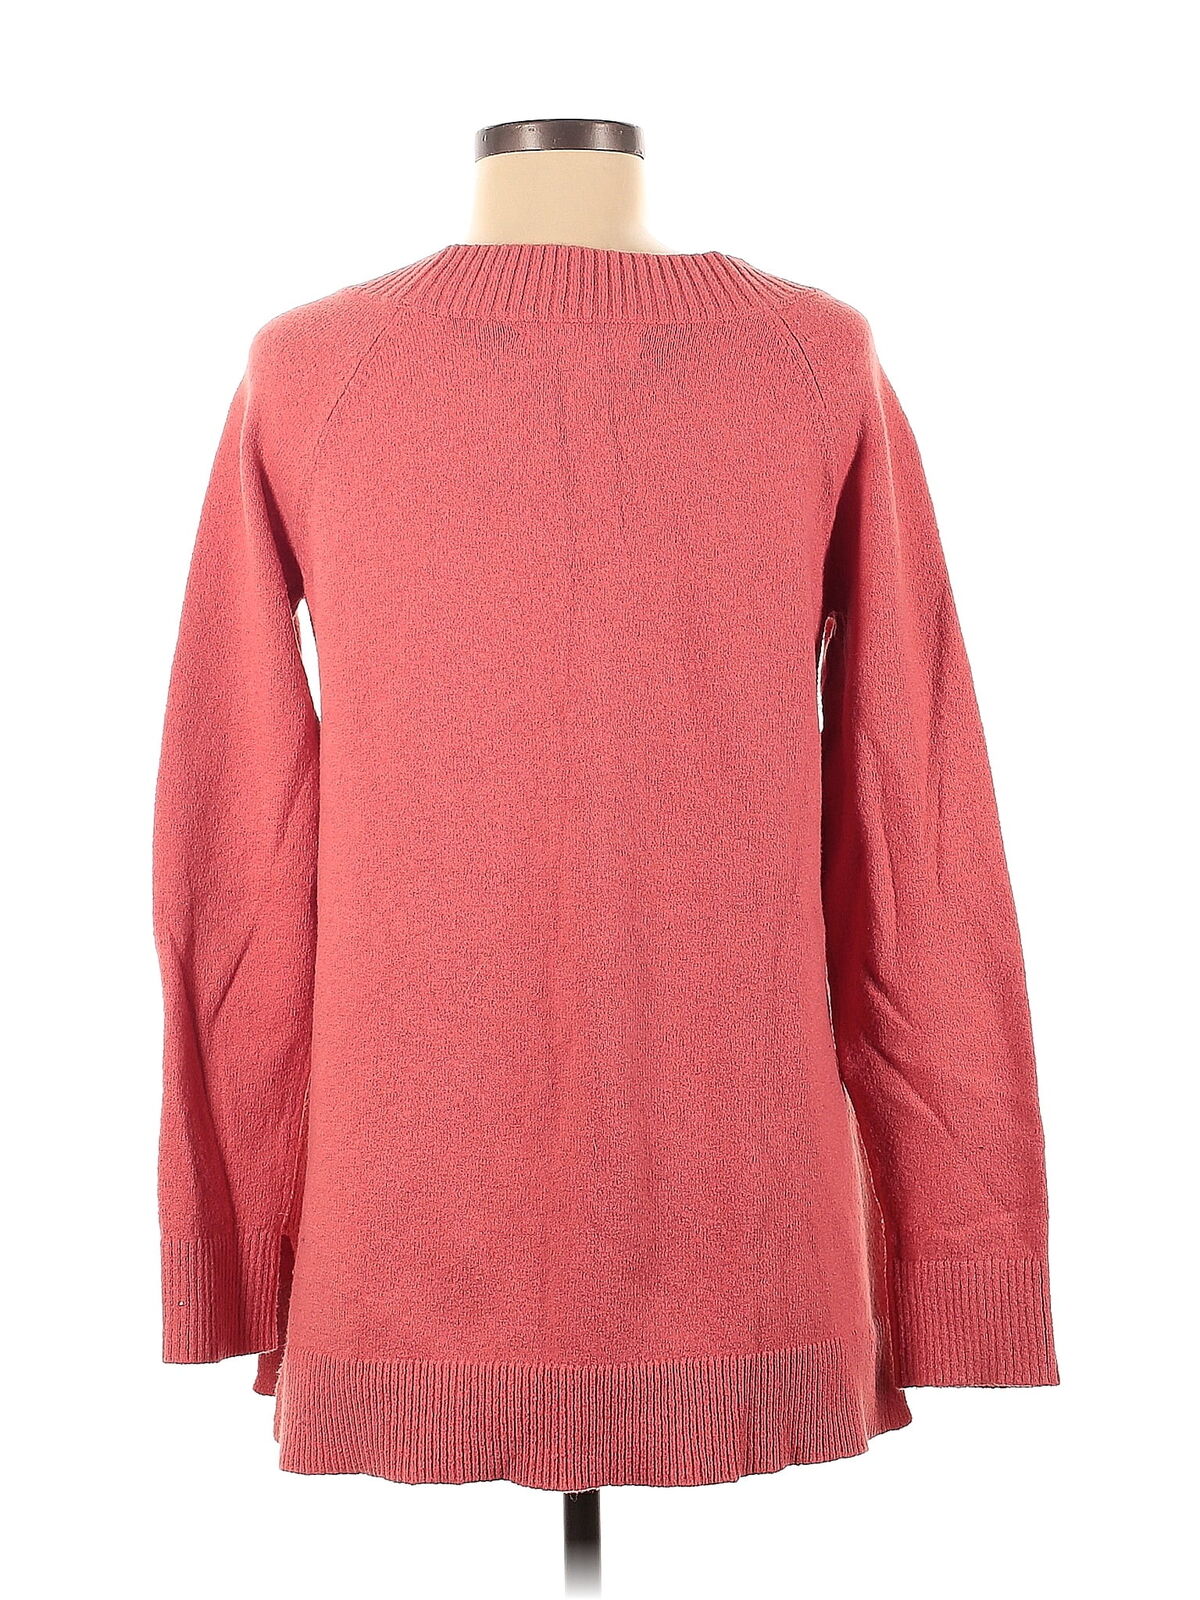 Ann Taylor LOFT Women Red Pullover Sweater M - image 2